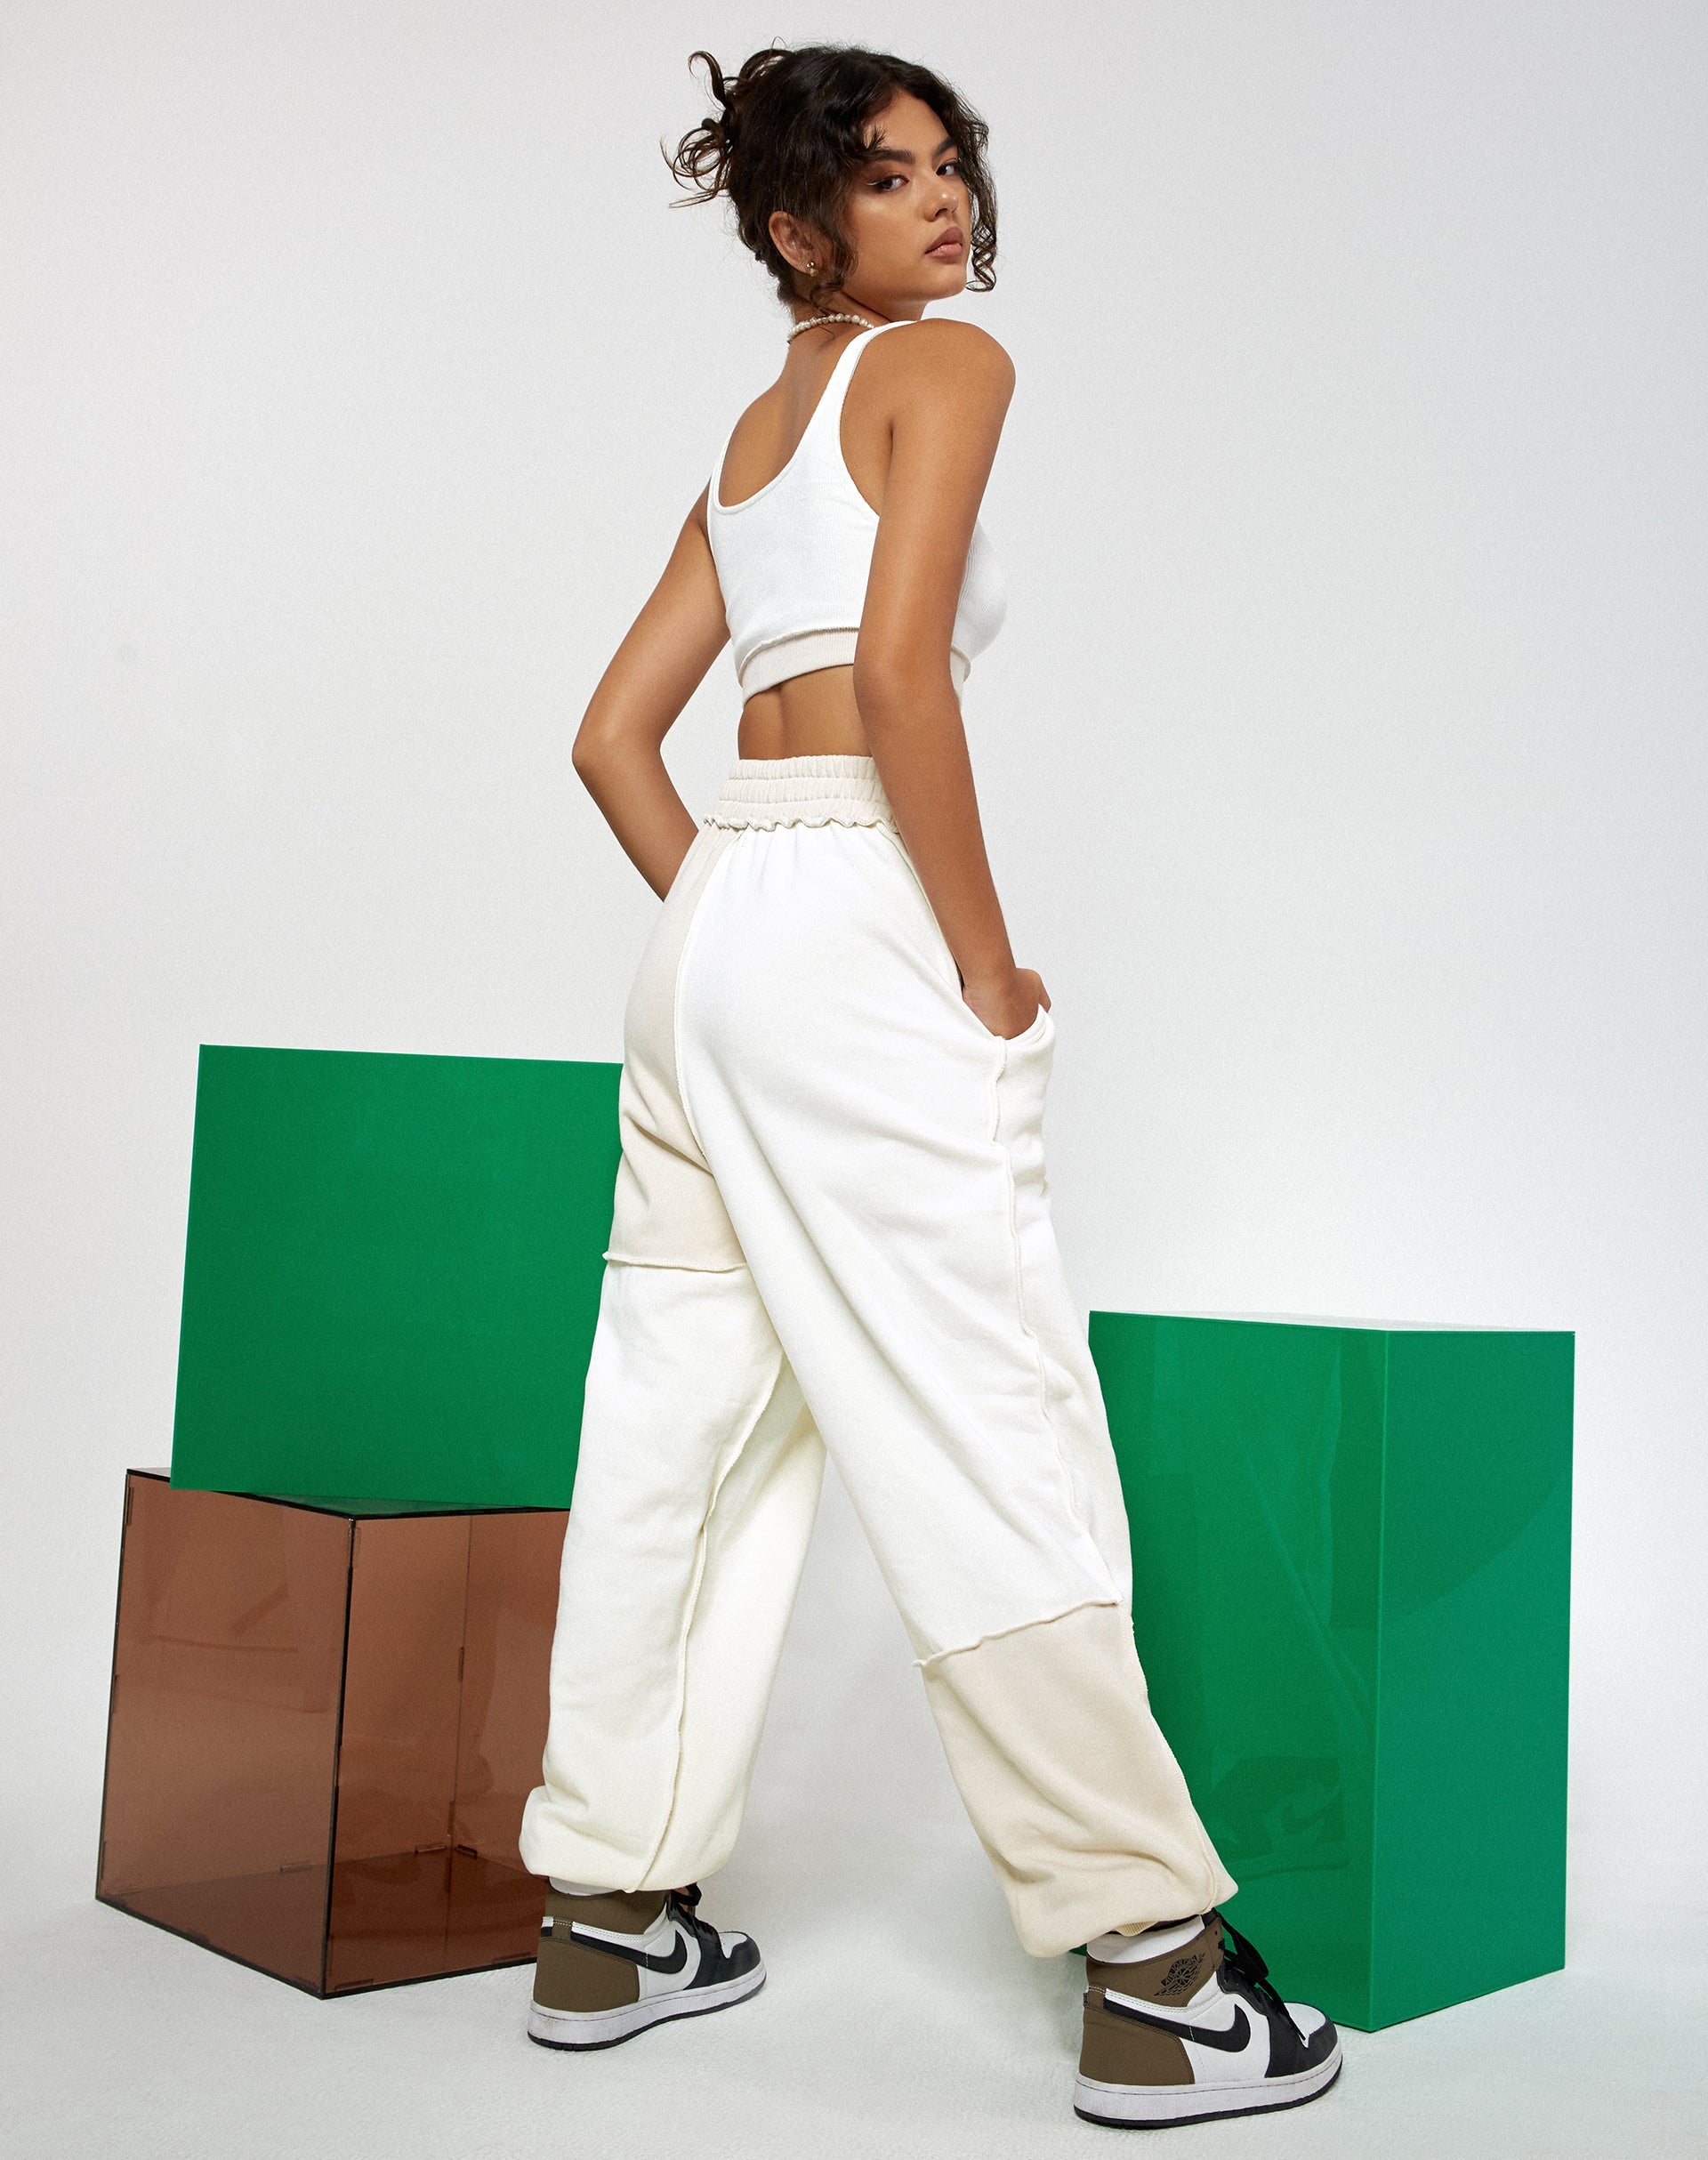 Image of Motel X Barbara Kristoffersen Albaca Trouser in Panelled Ivory and Winter White